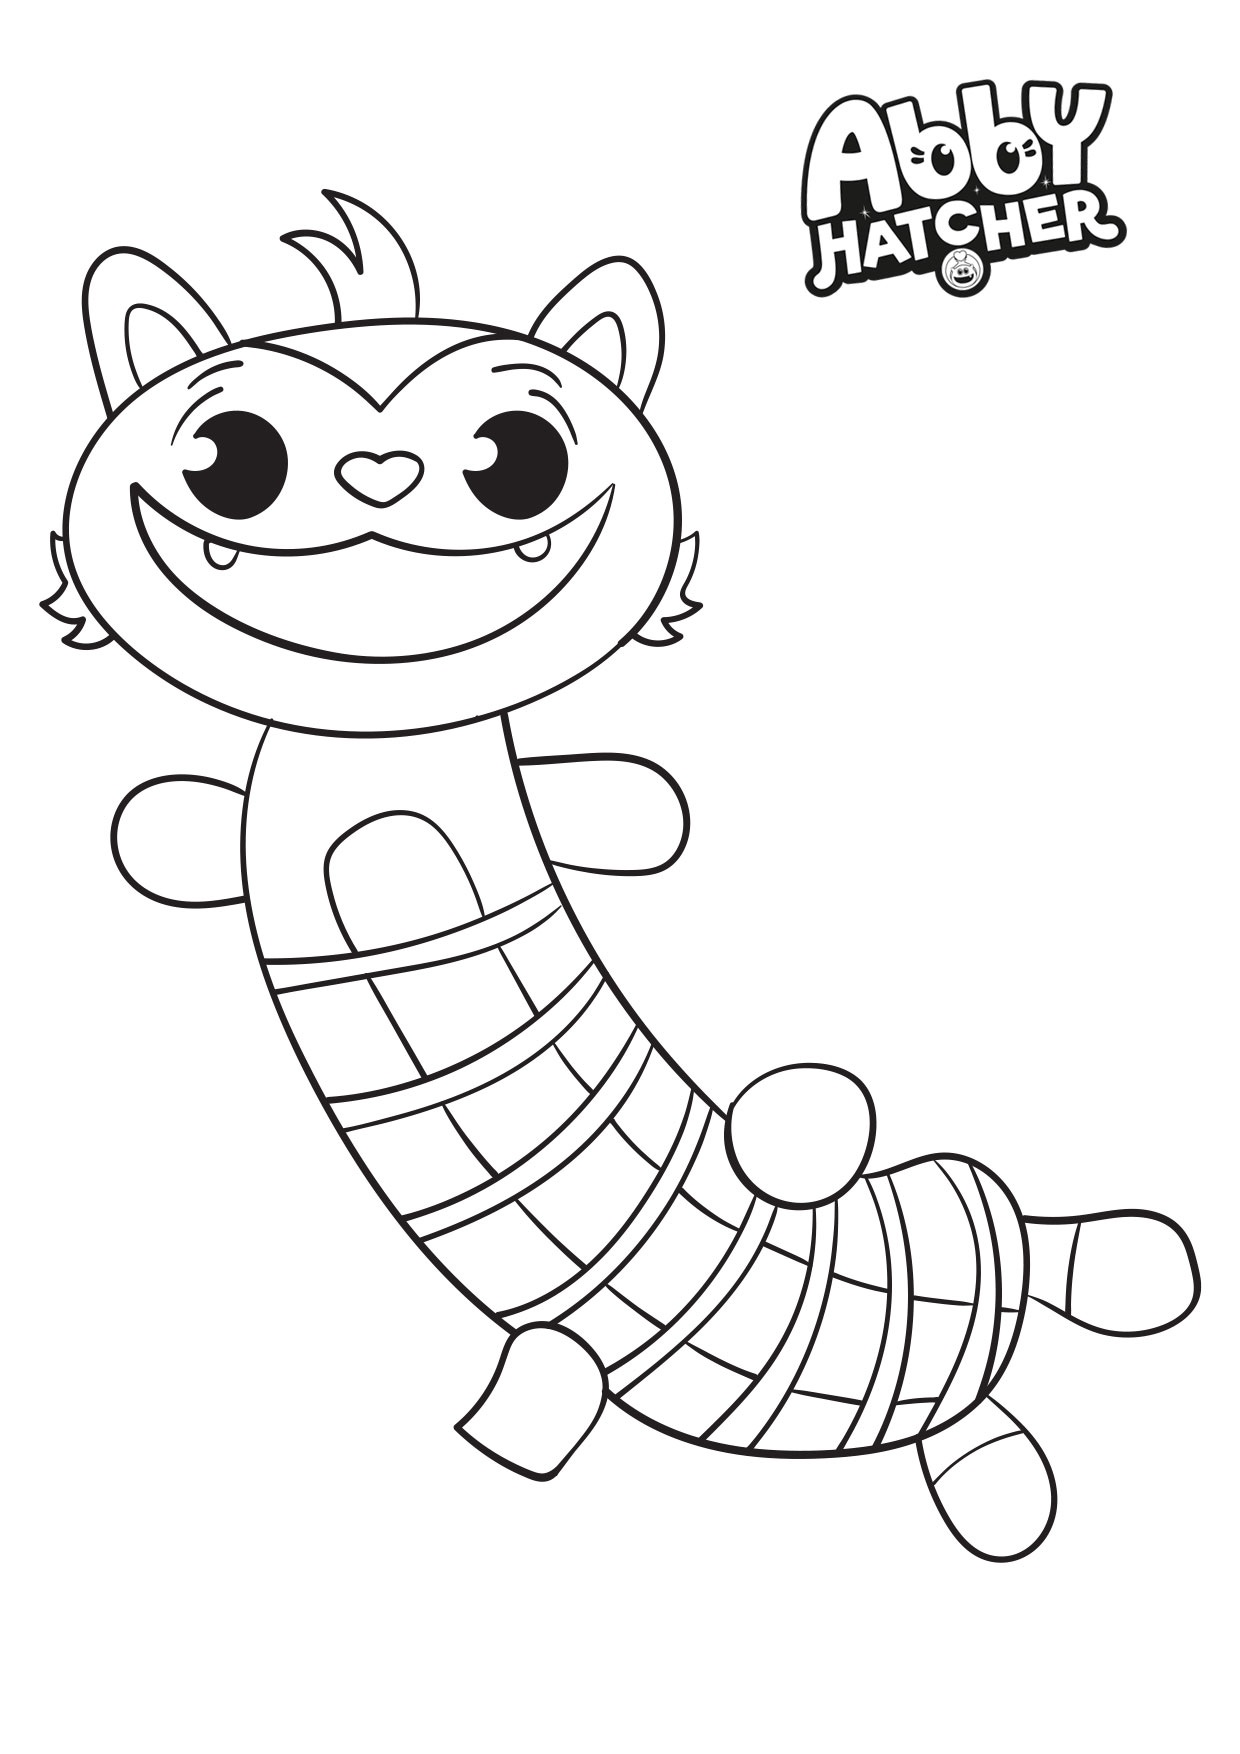 Abby Hatcher Mo Coloring Page